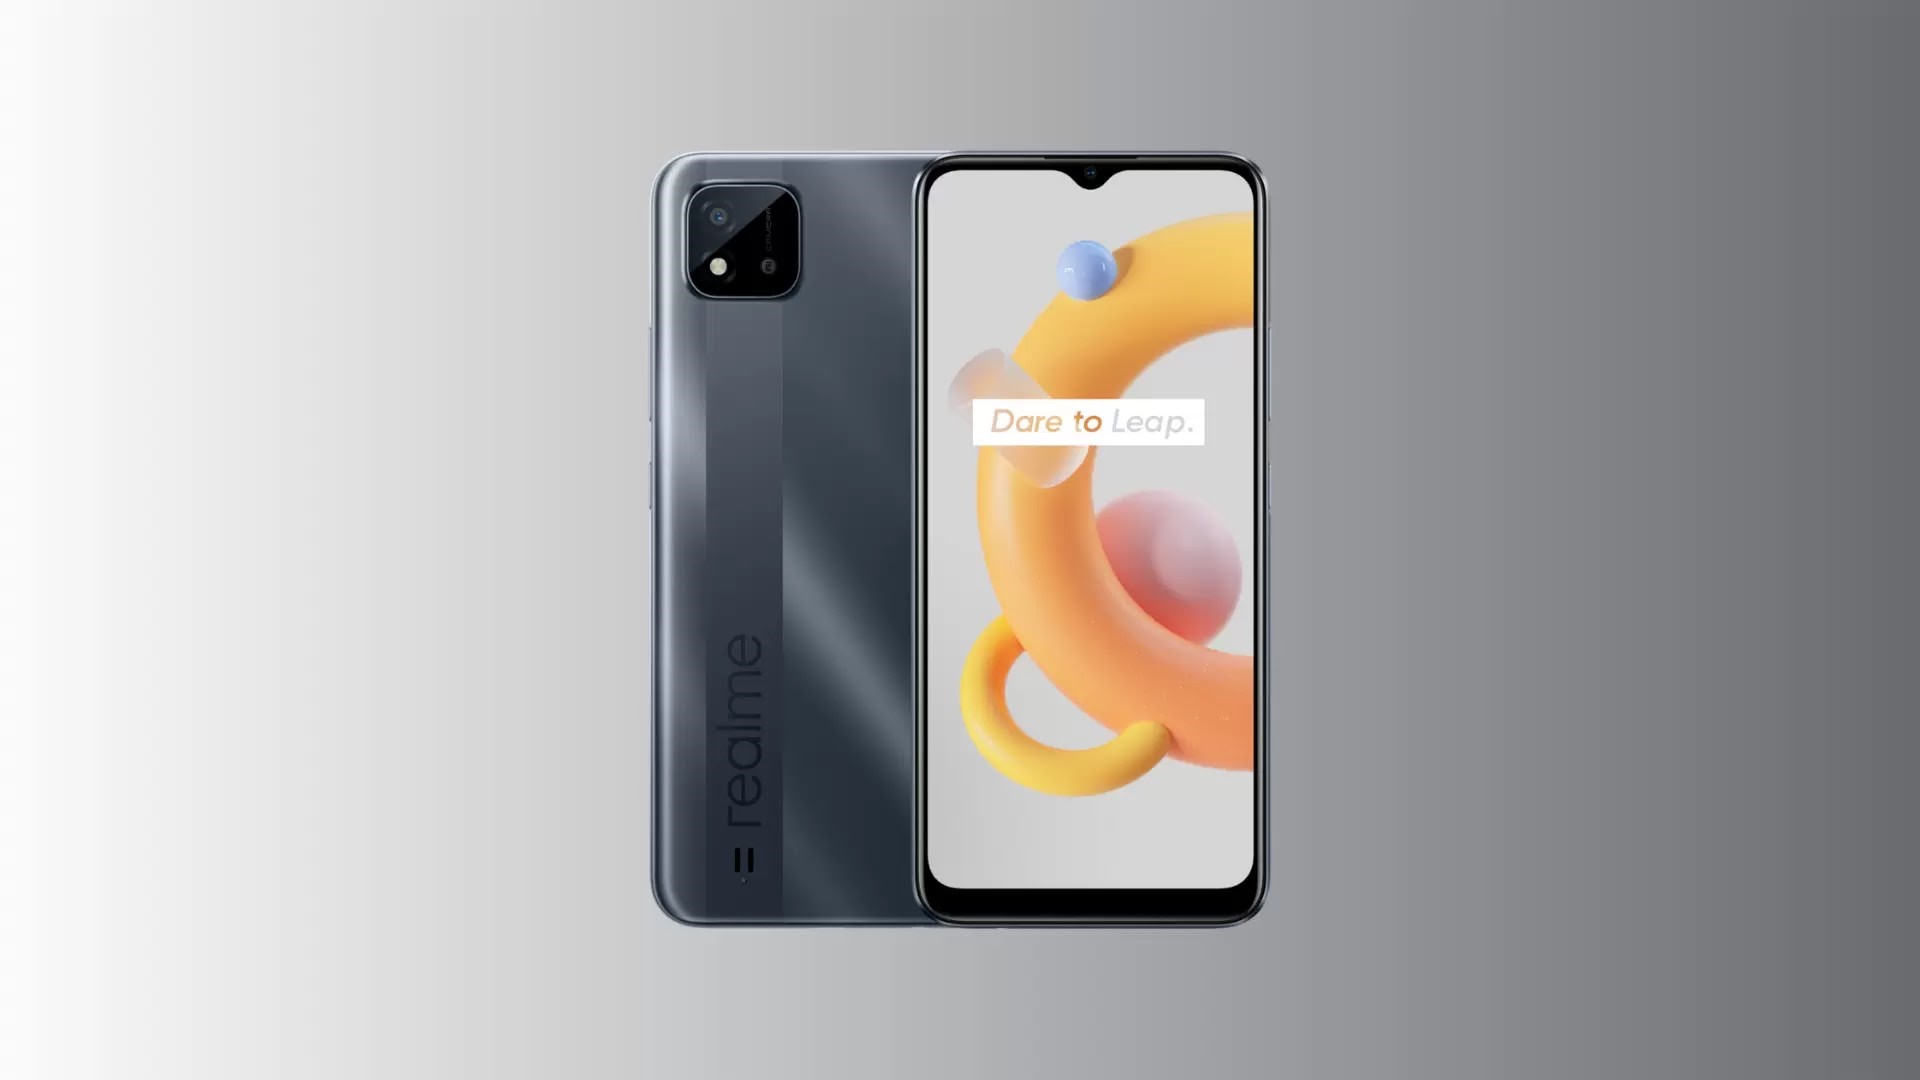 Realme c11 - Realme C11 (2021) With Octa-Core SoC, 5,000 Mah Battery Launched In India At Rs 6,999; Specs Right Here. - Telugu Tech World